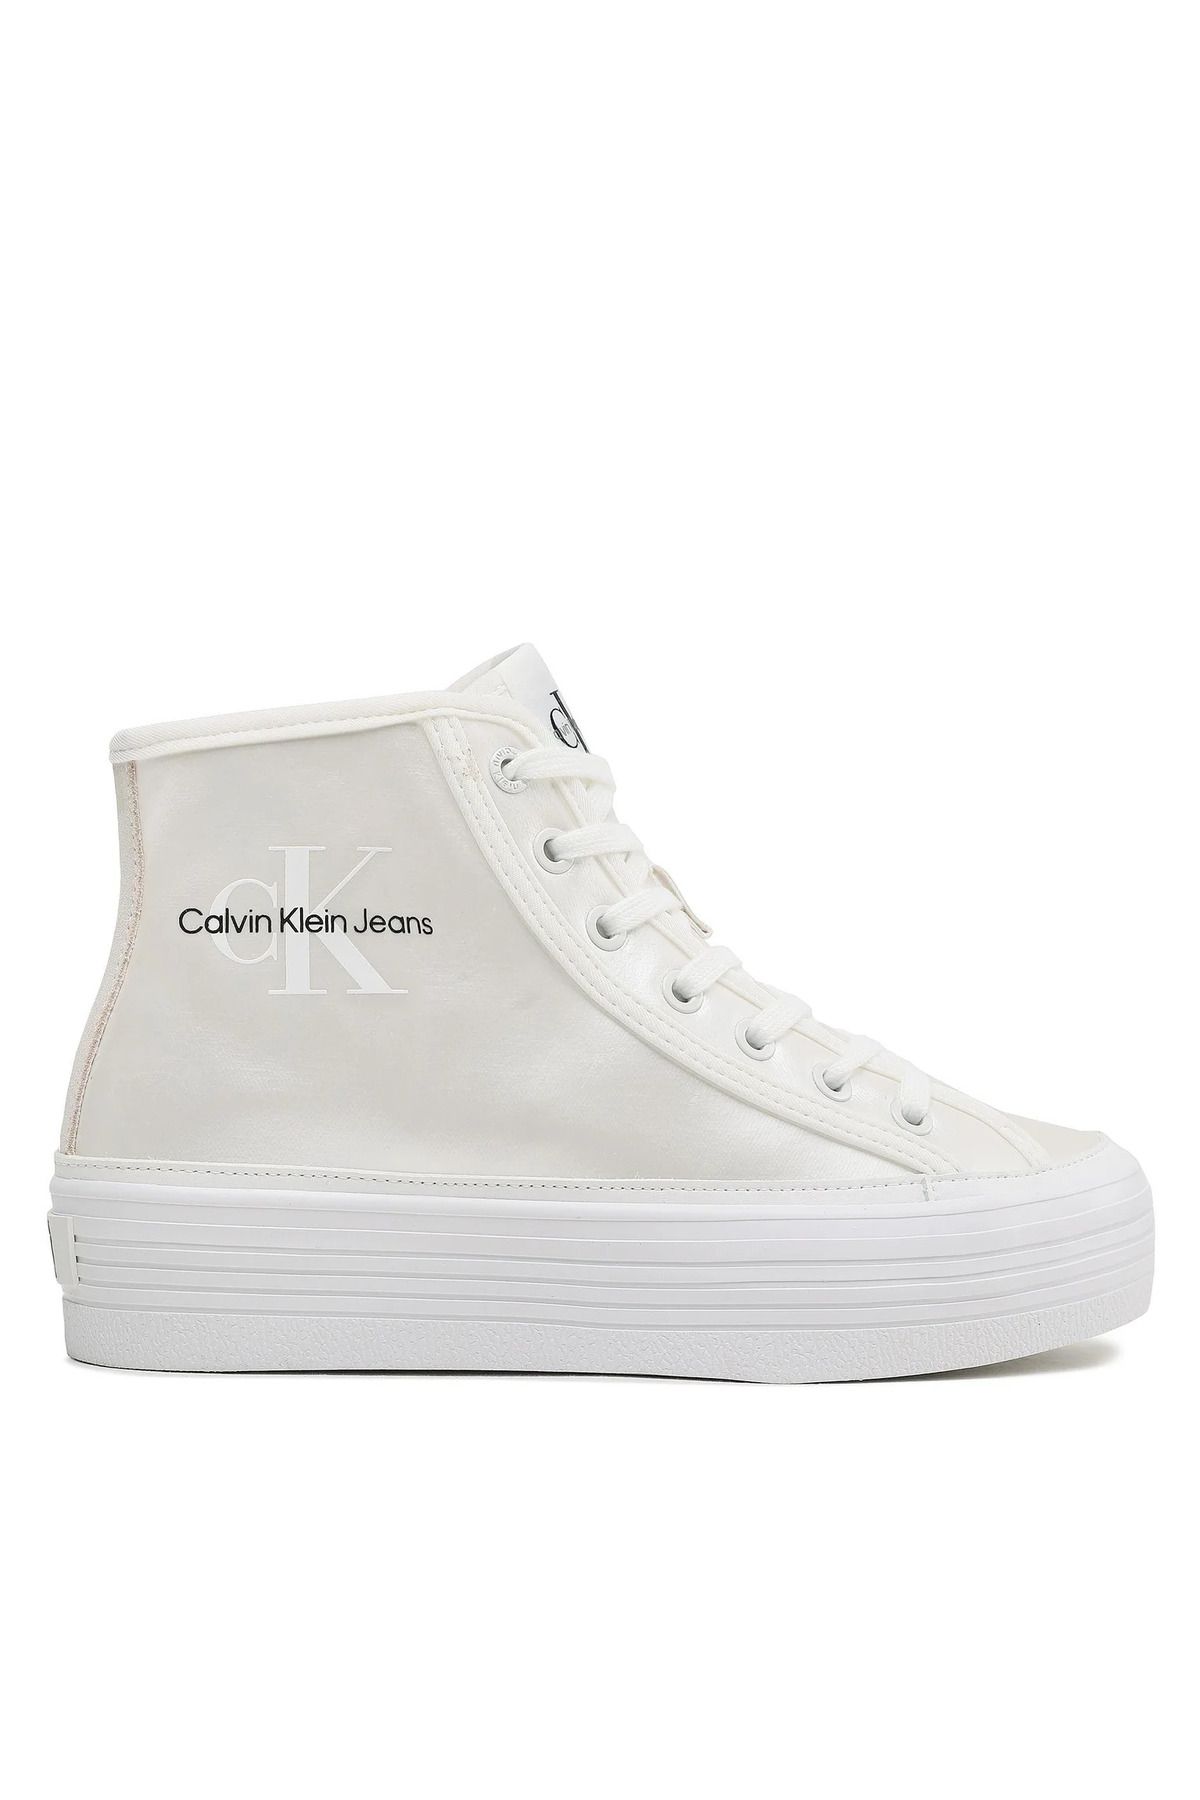 Calvin Klein Jeans Bold Vulc Flatf Mid Laceup Sneakers